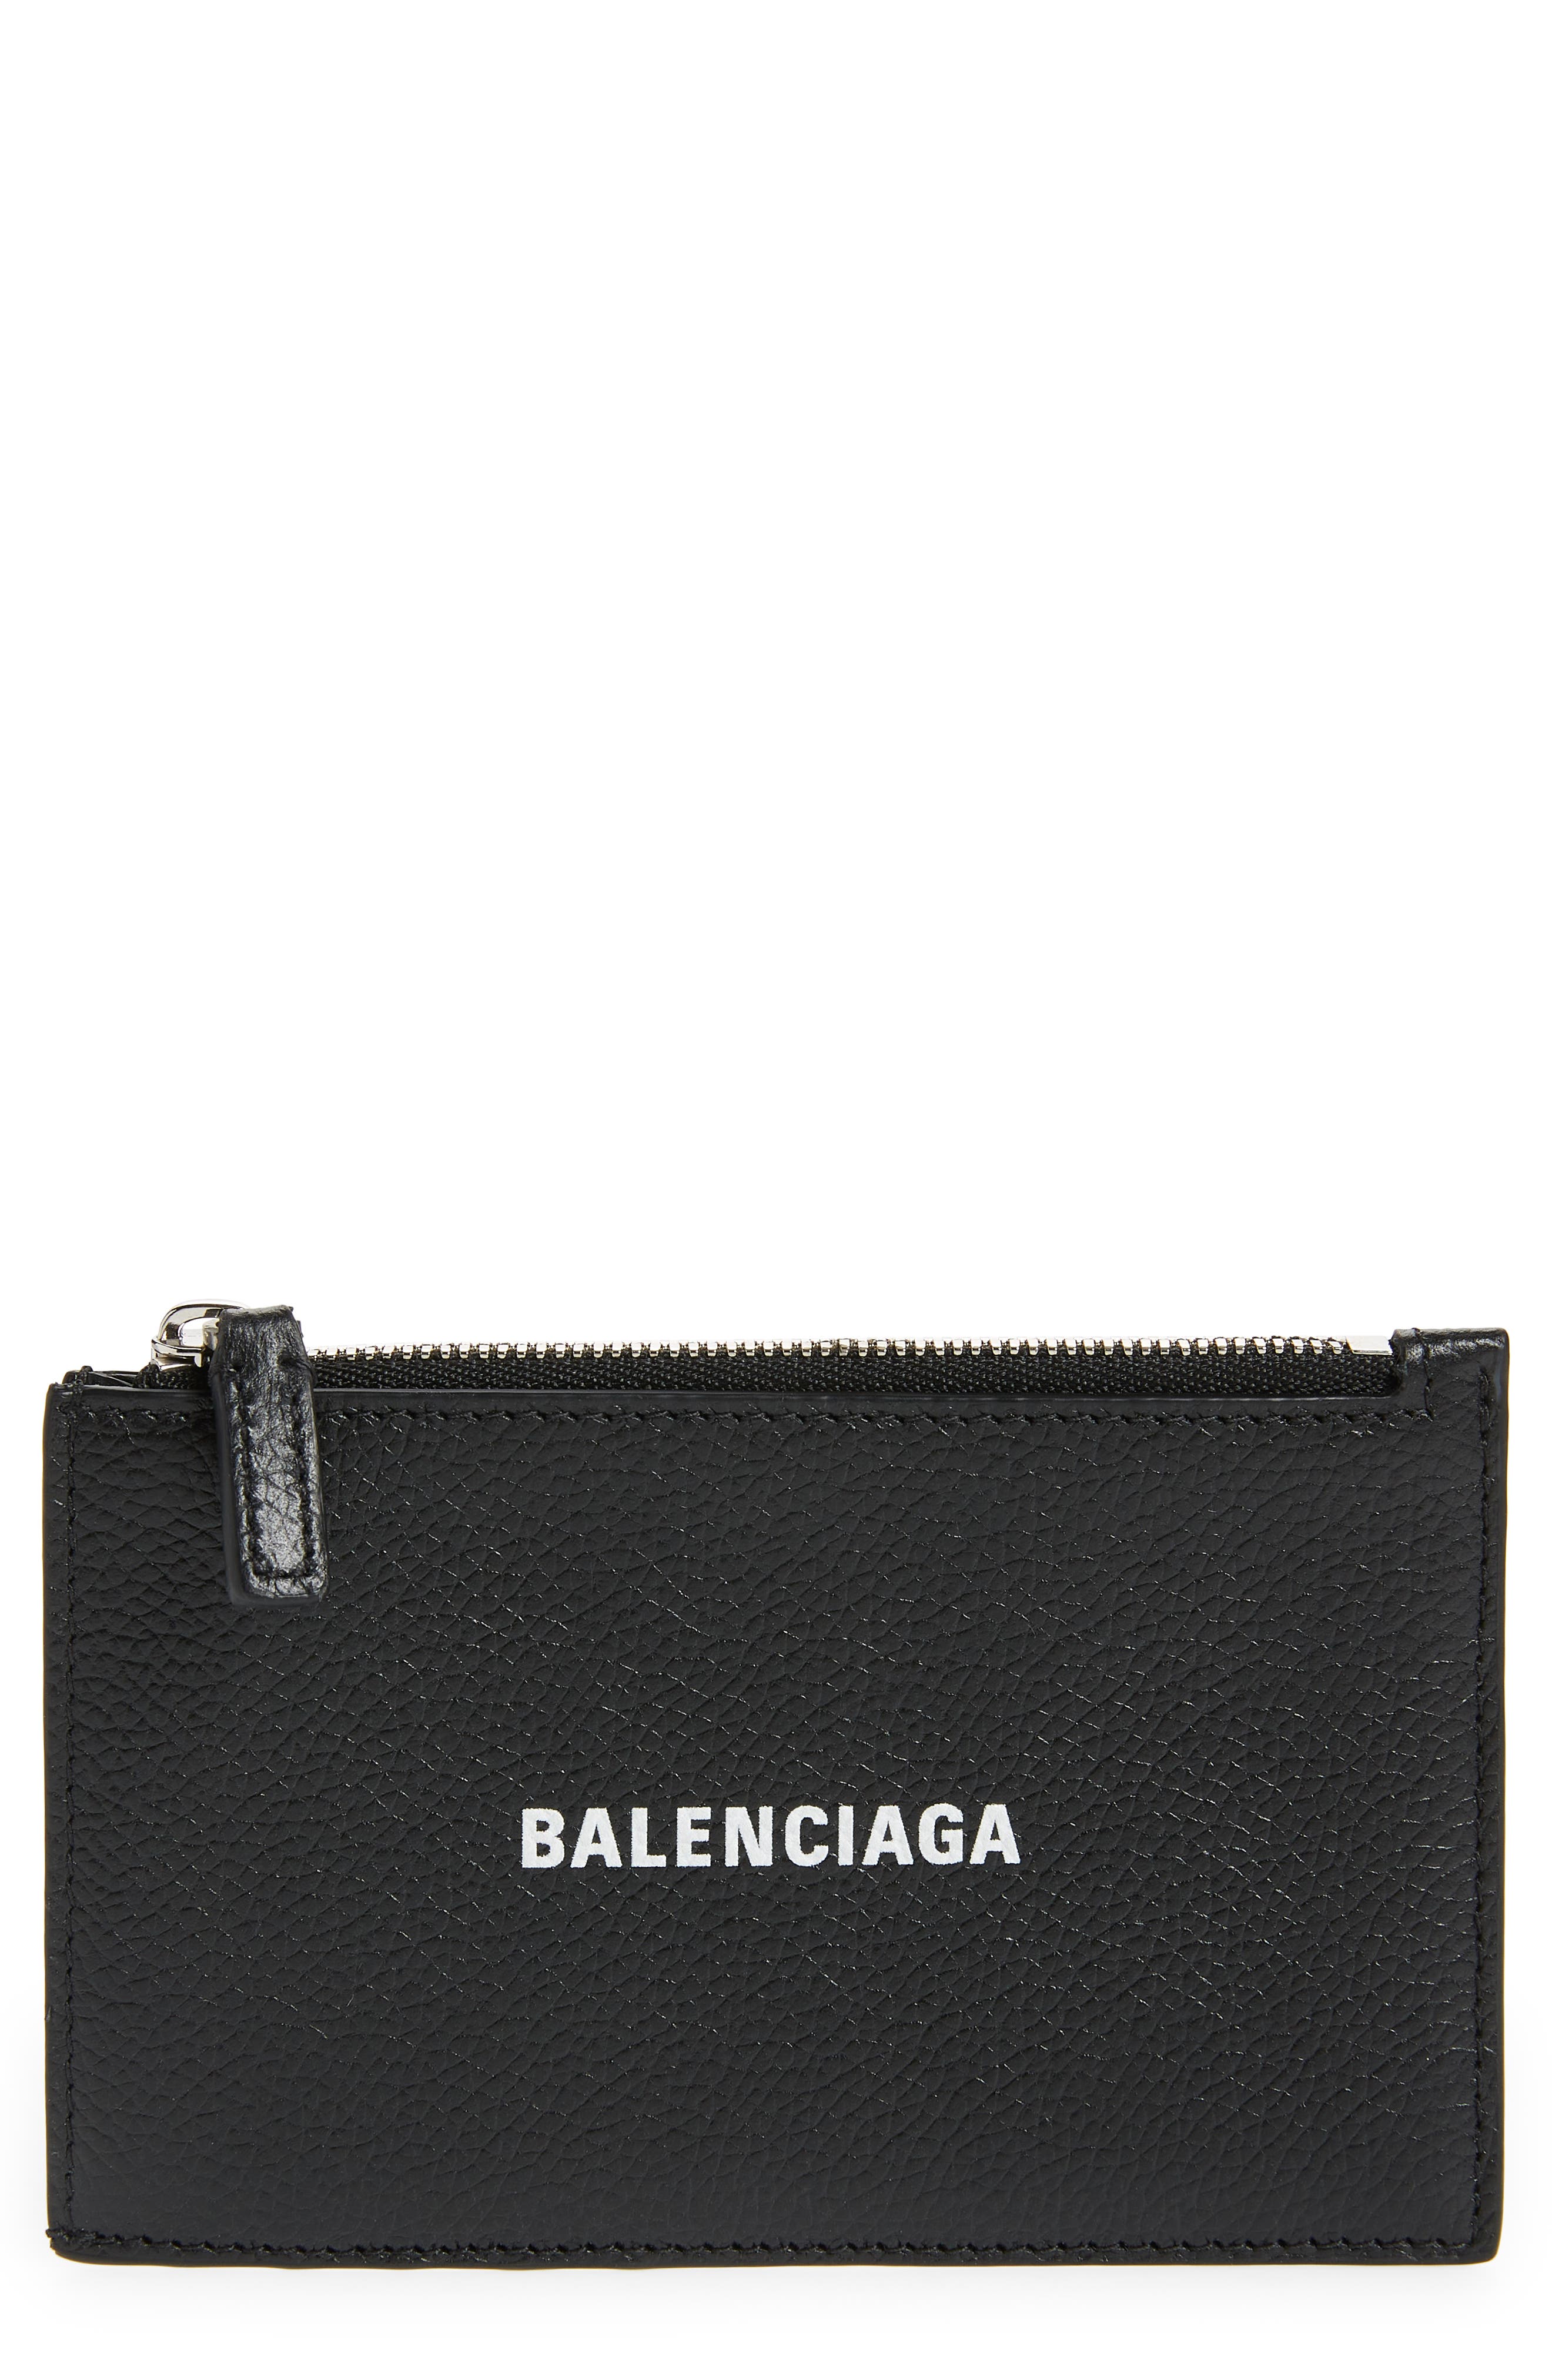 Balenciaga Classic Zip Leather Card Case in Black/White at Nordstrom